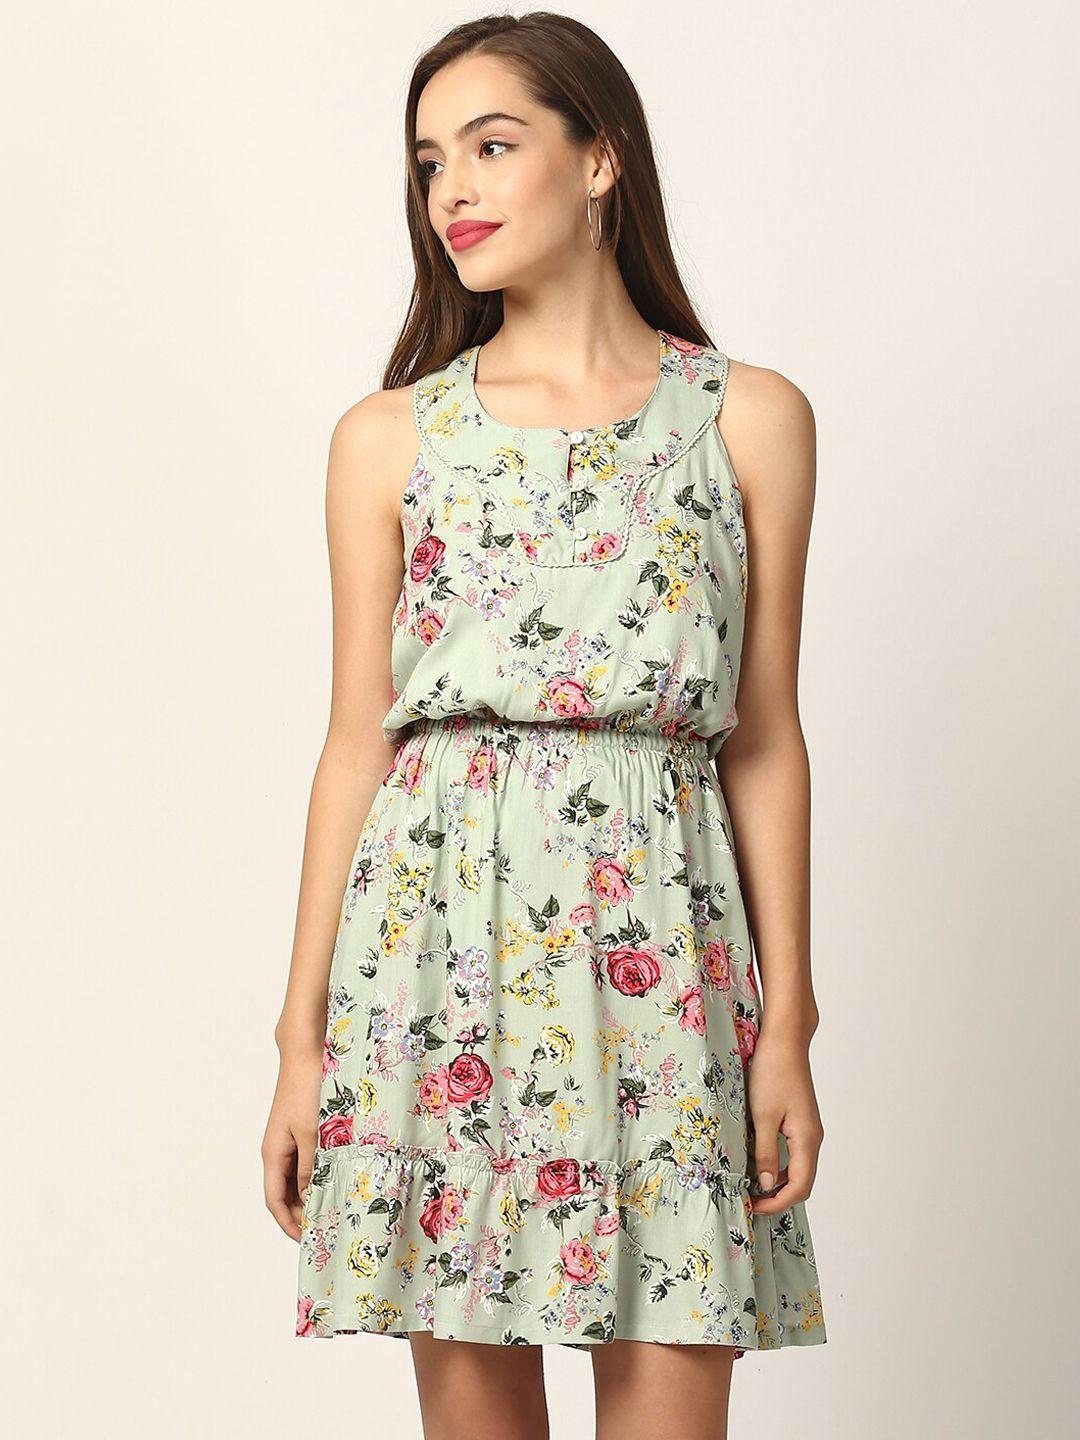 elle women green floral rinted fit and flare dress